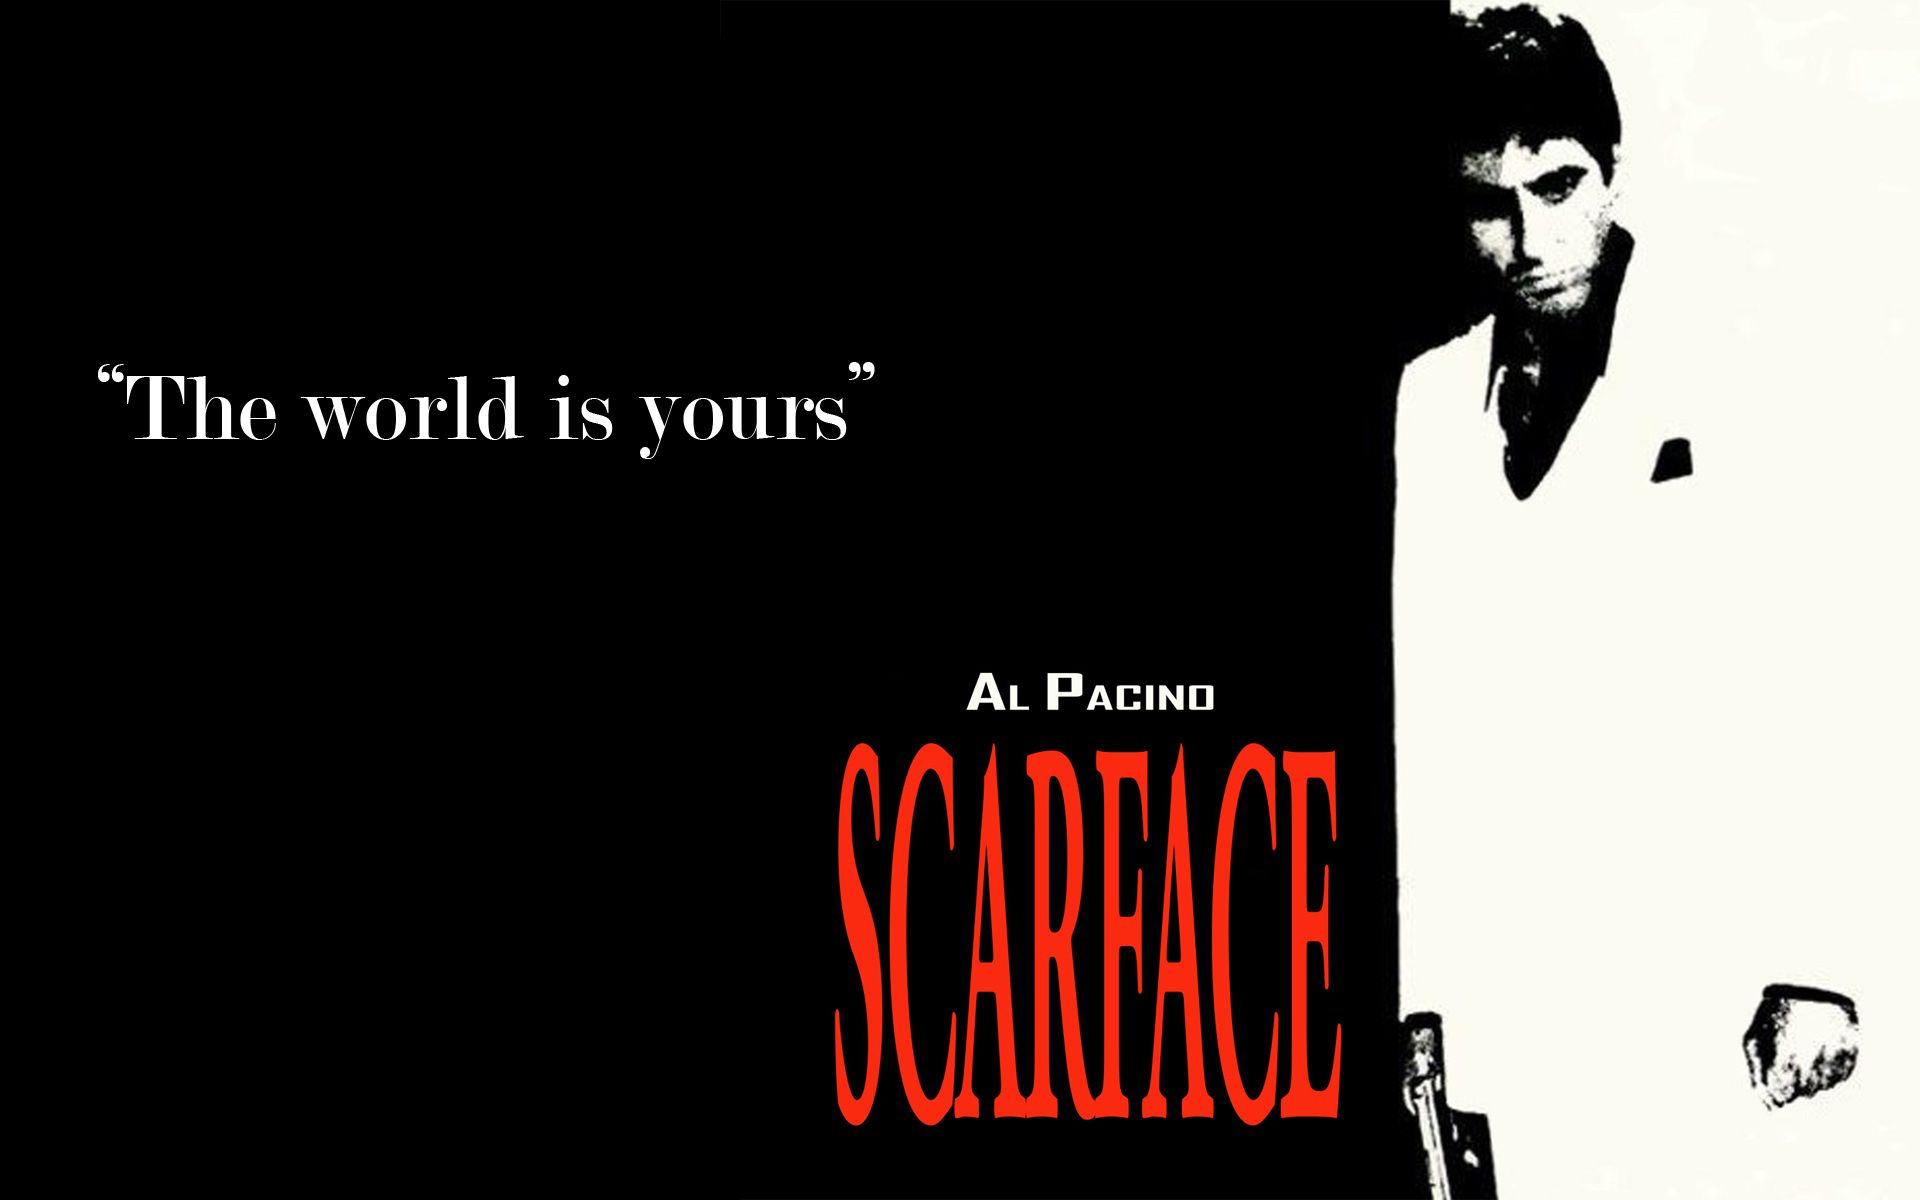 Scarface video game pc